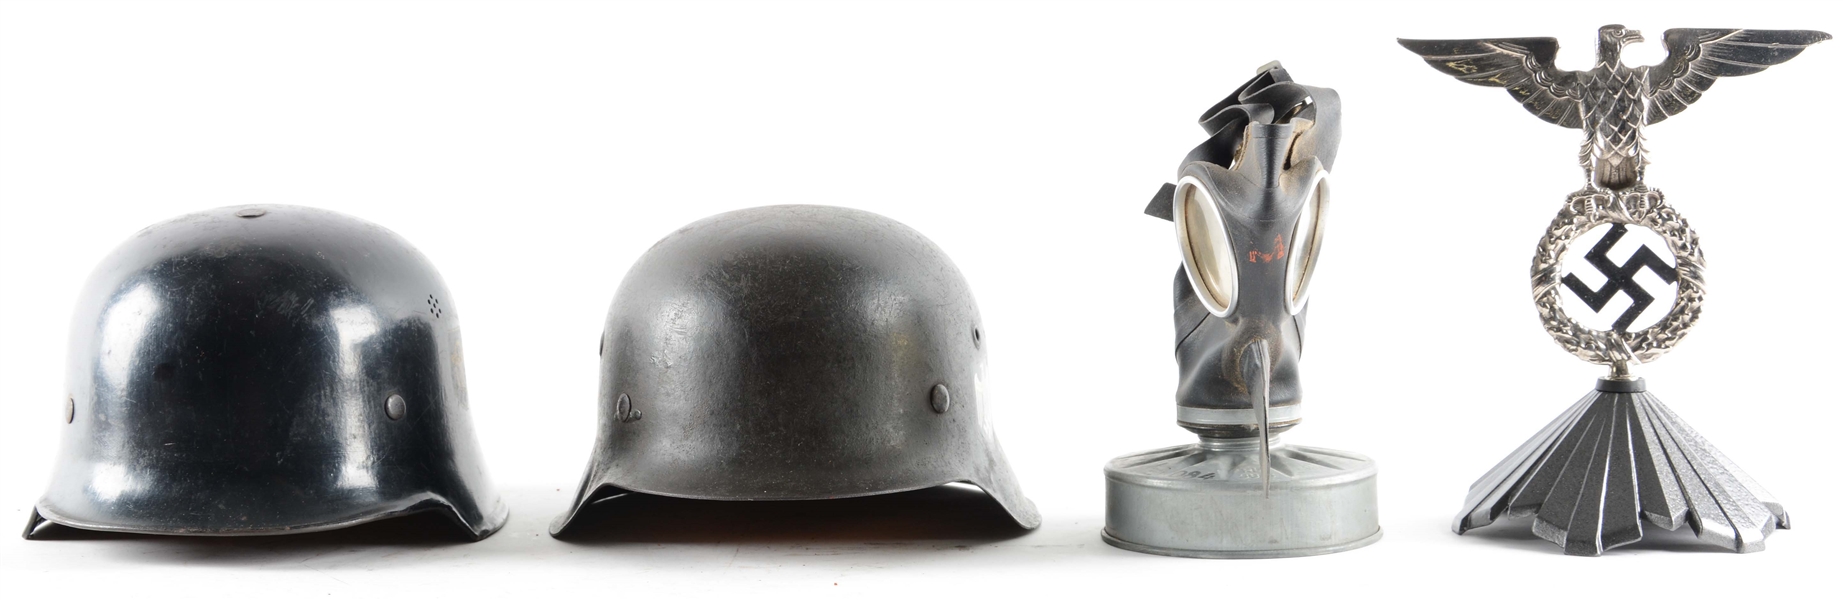 LOT OF 4: THIRD REICH M34 POLICE HELMET, M42 ARMY HELMET, "NSDAP" POLE TOP, AND GAS MASK.